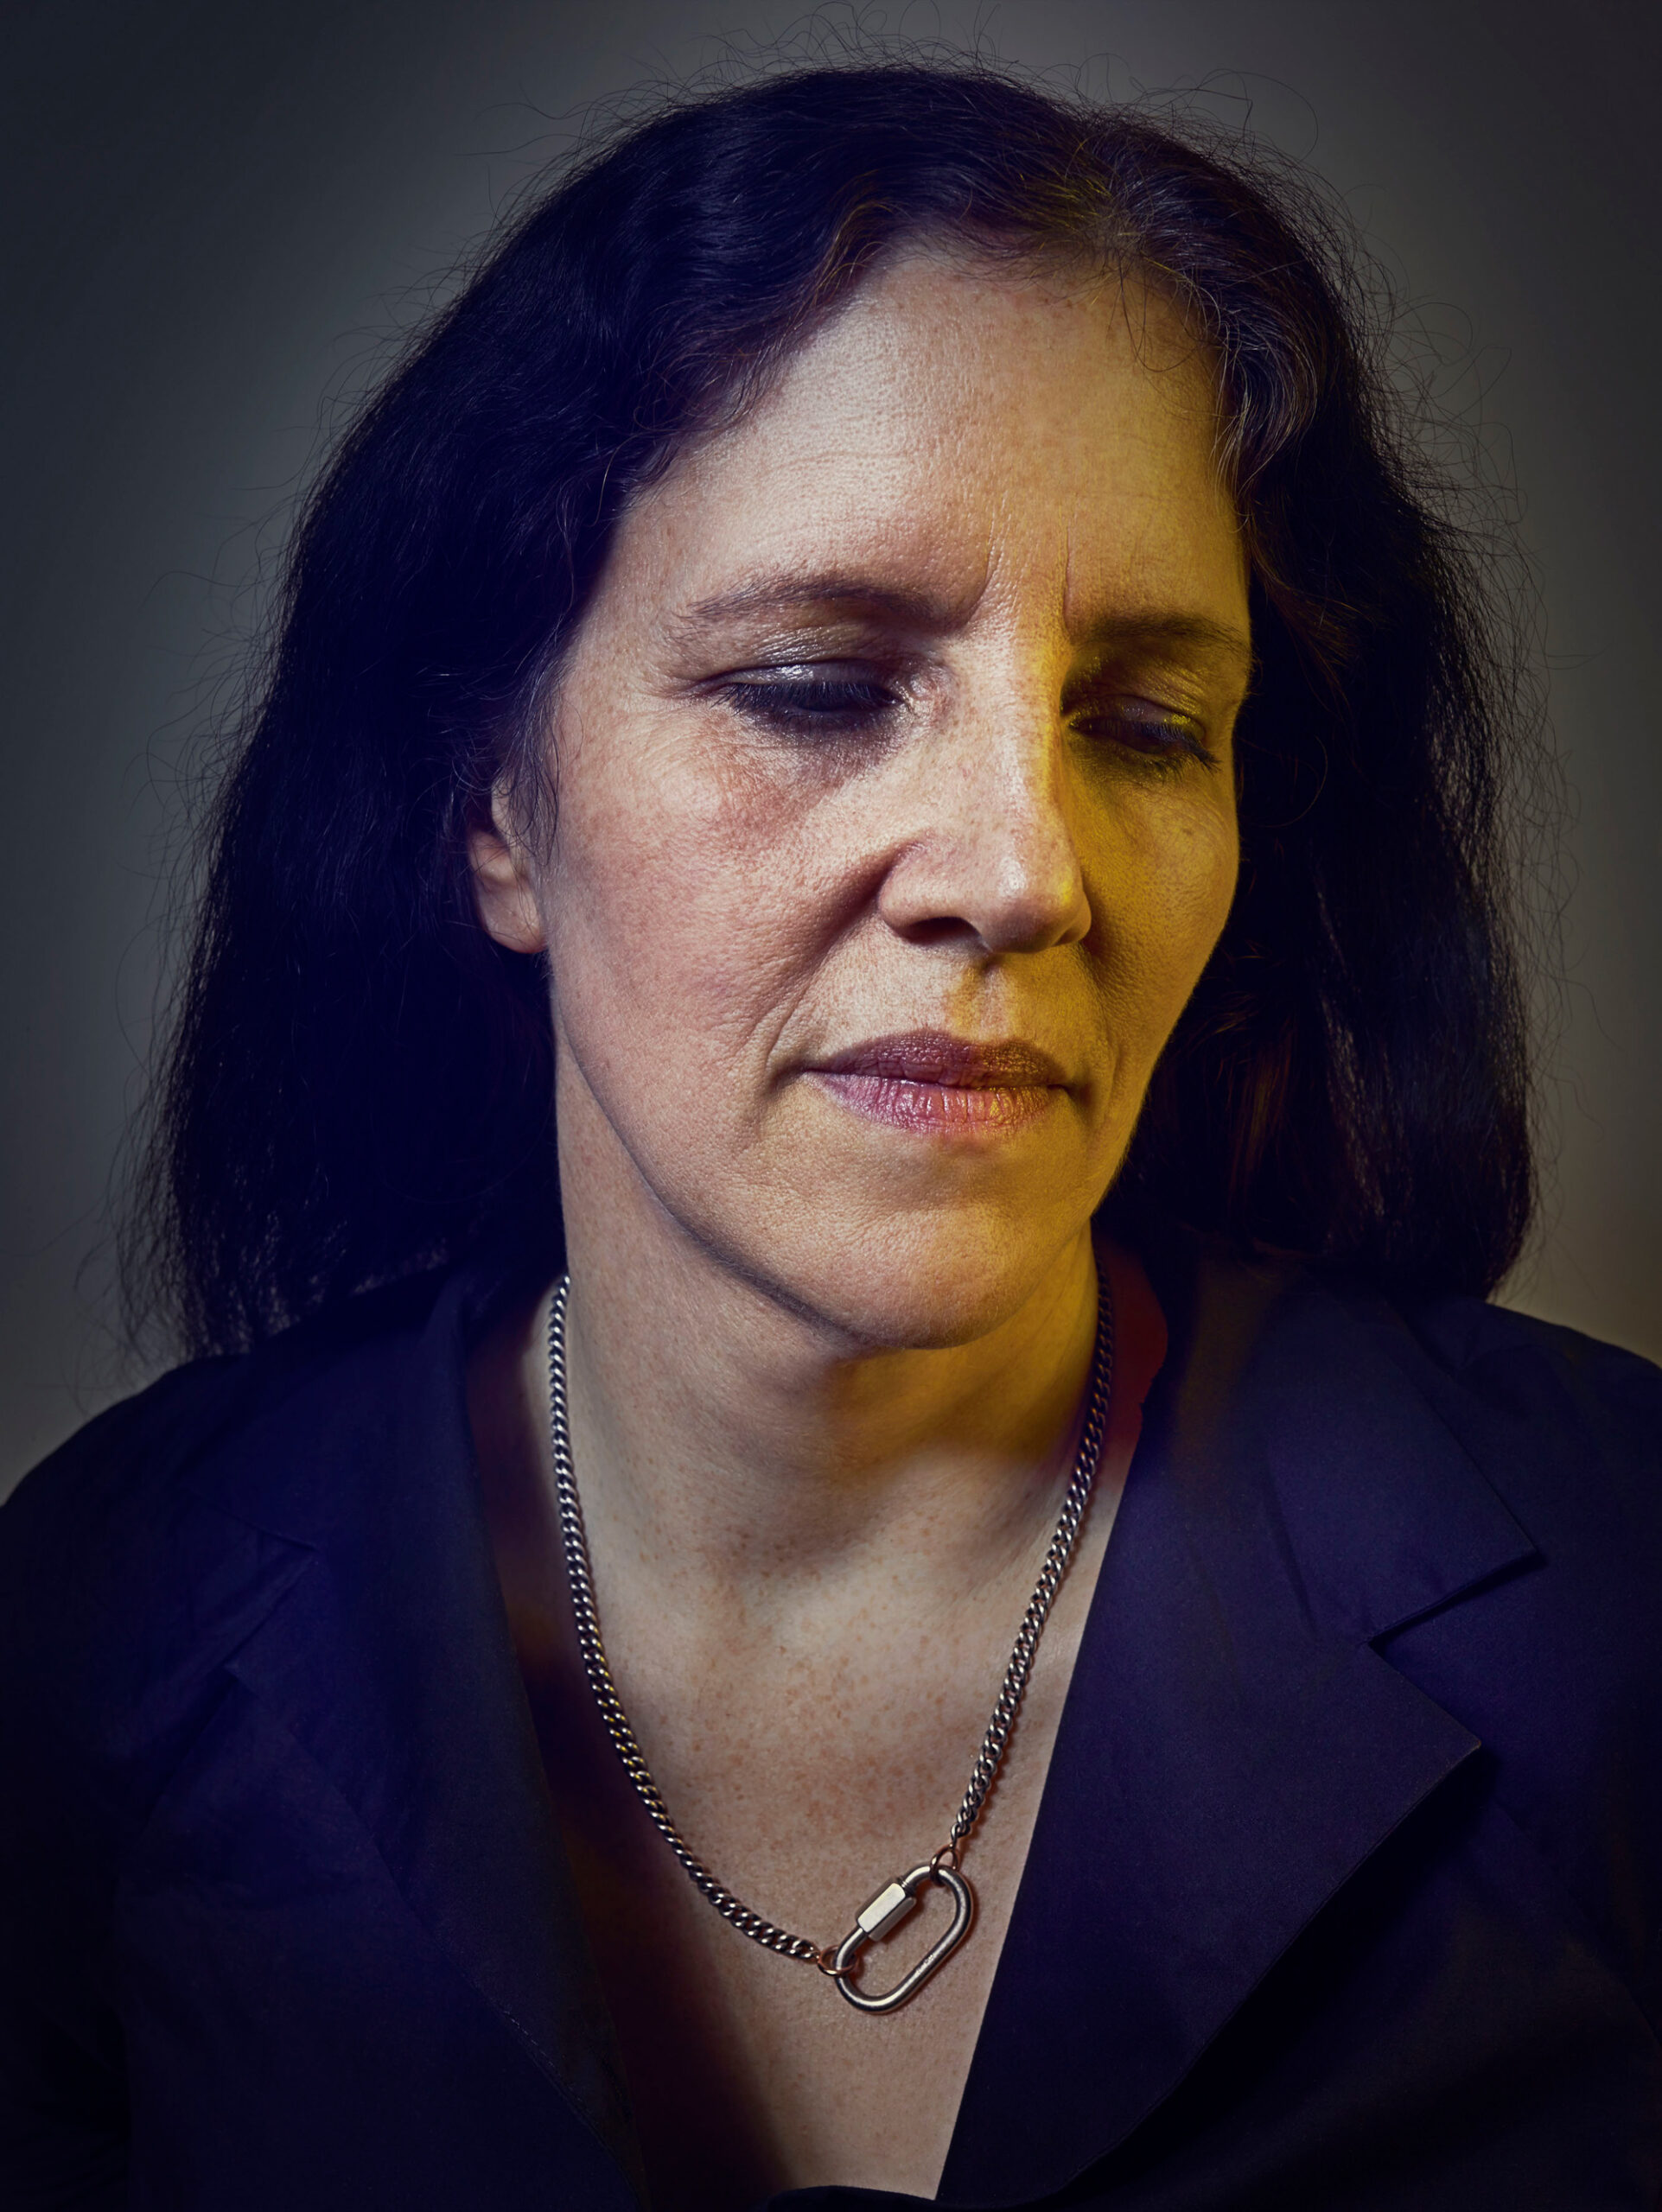 James-Day-Laura-Poitras-New-Yorker